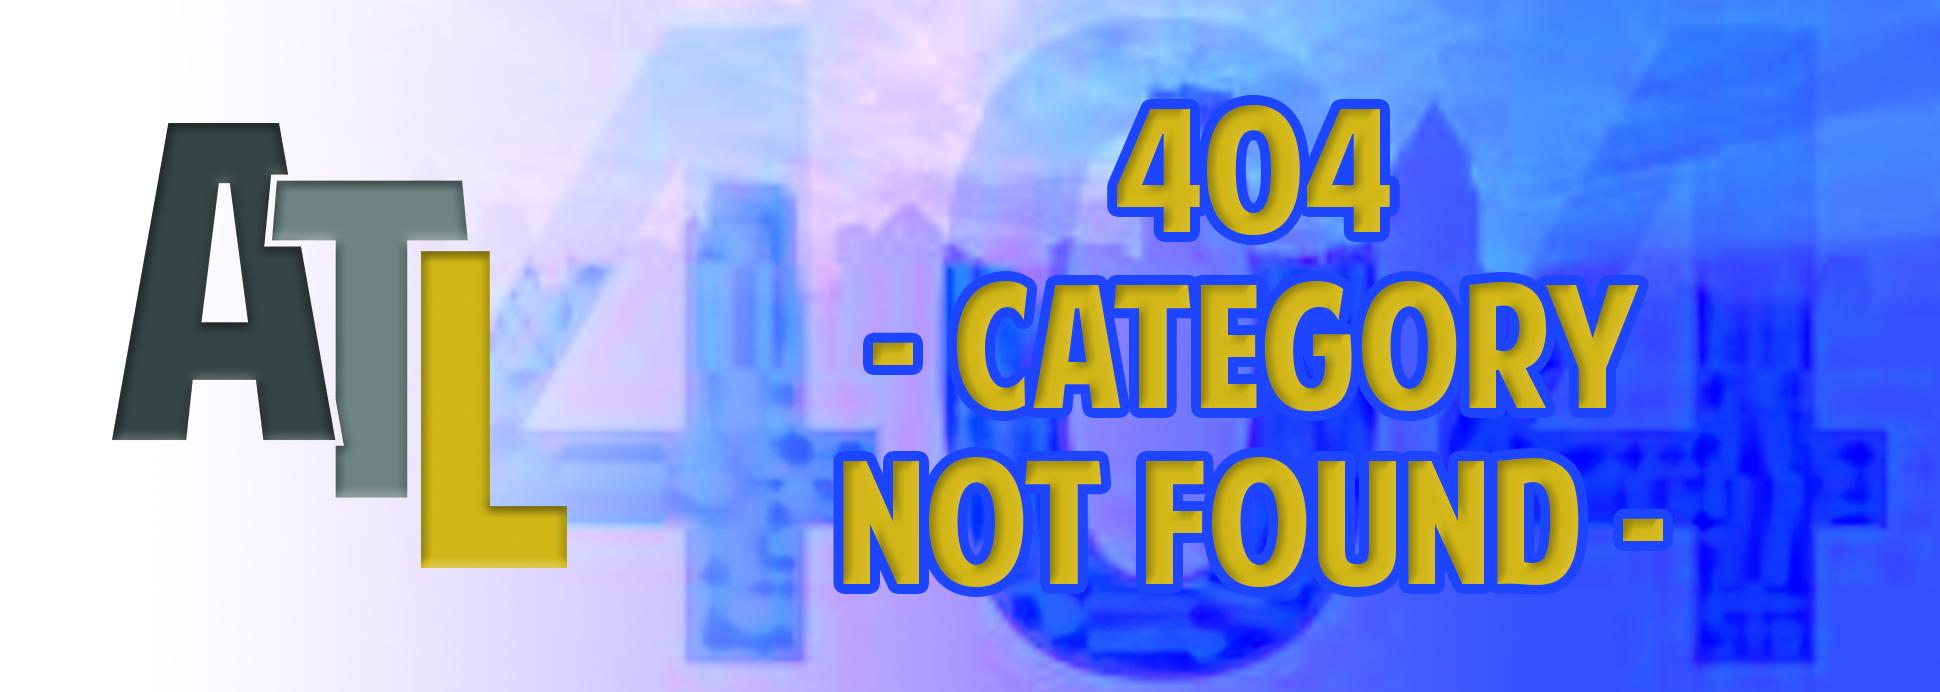 404 - Category Not Found